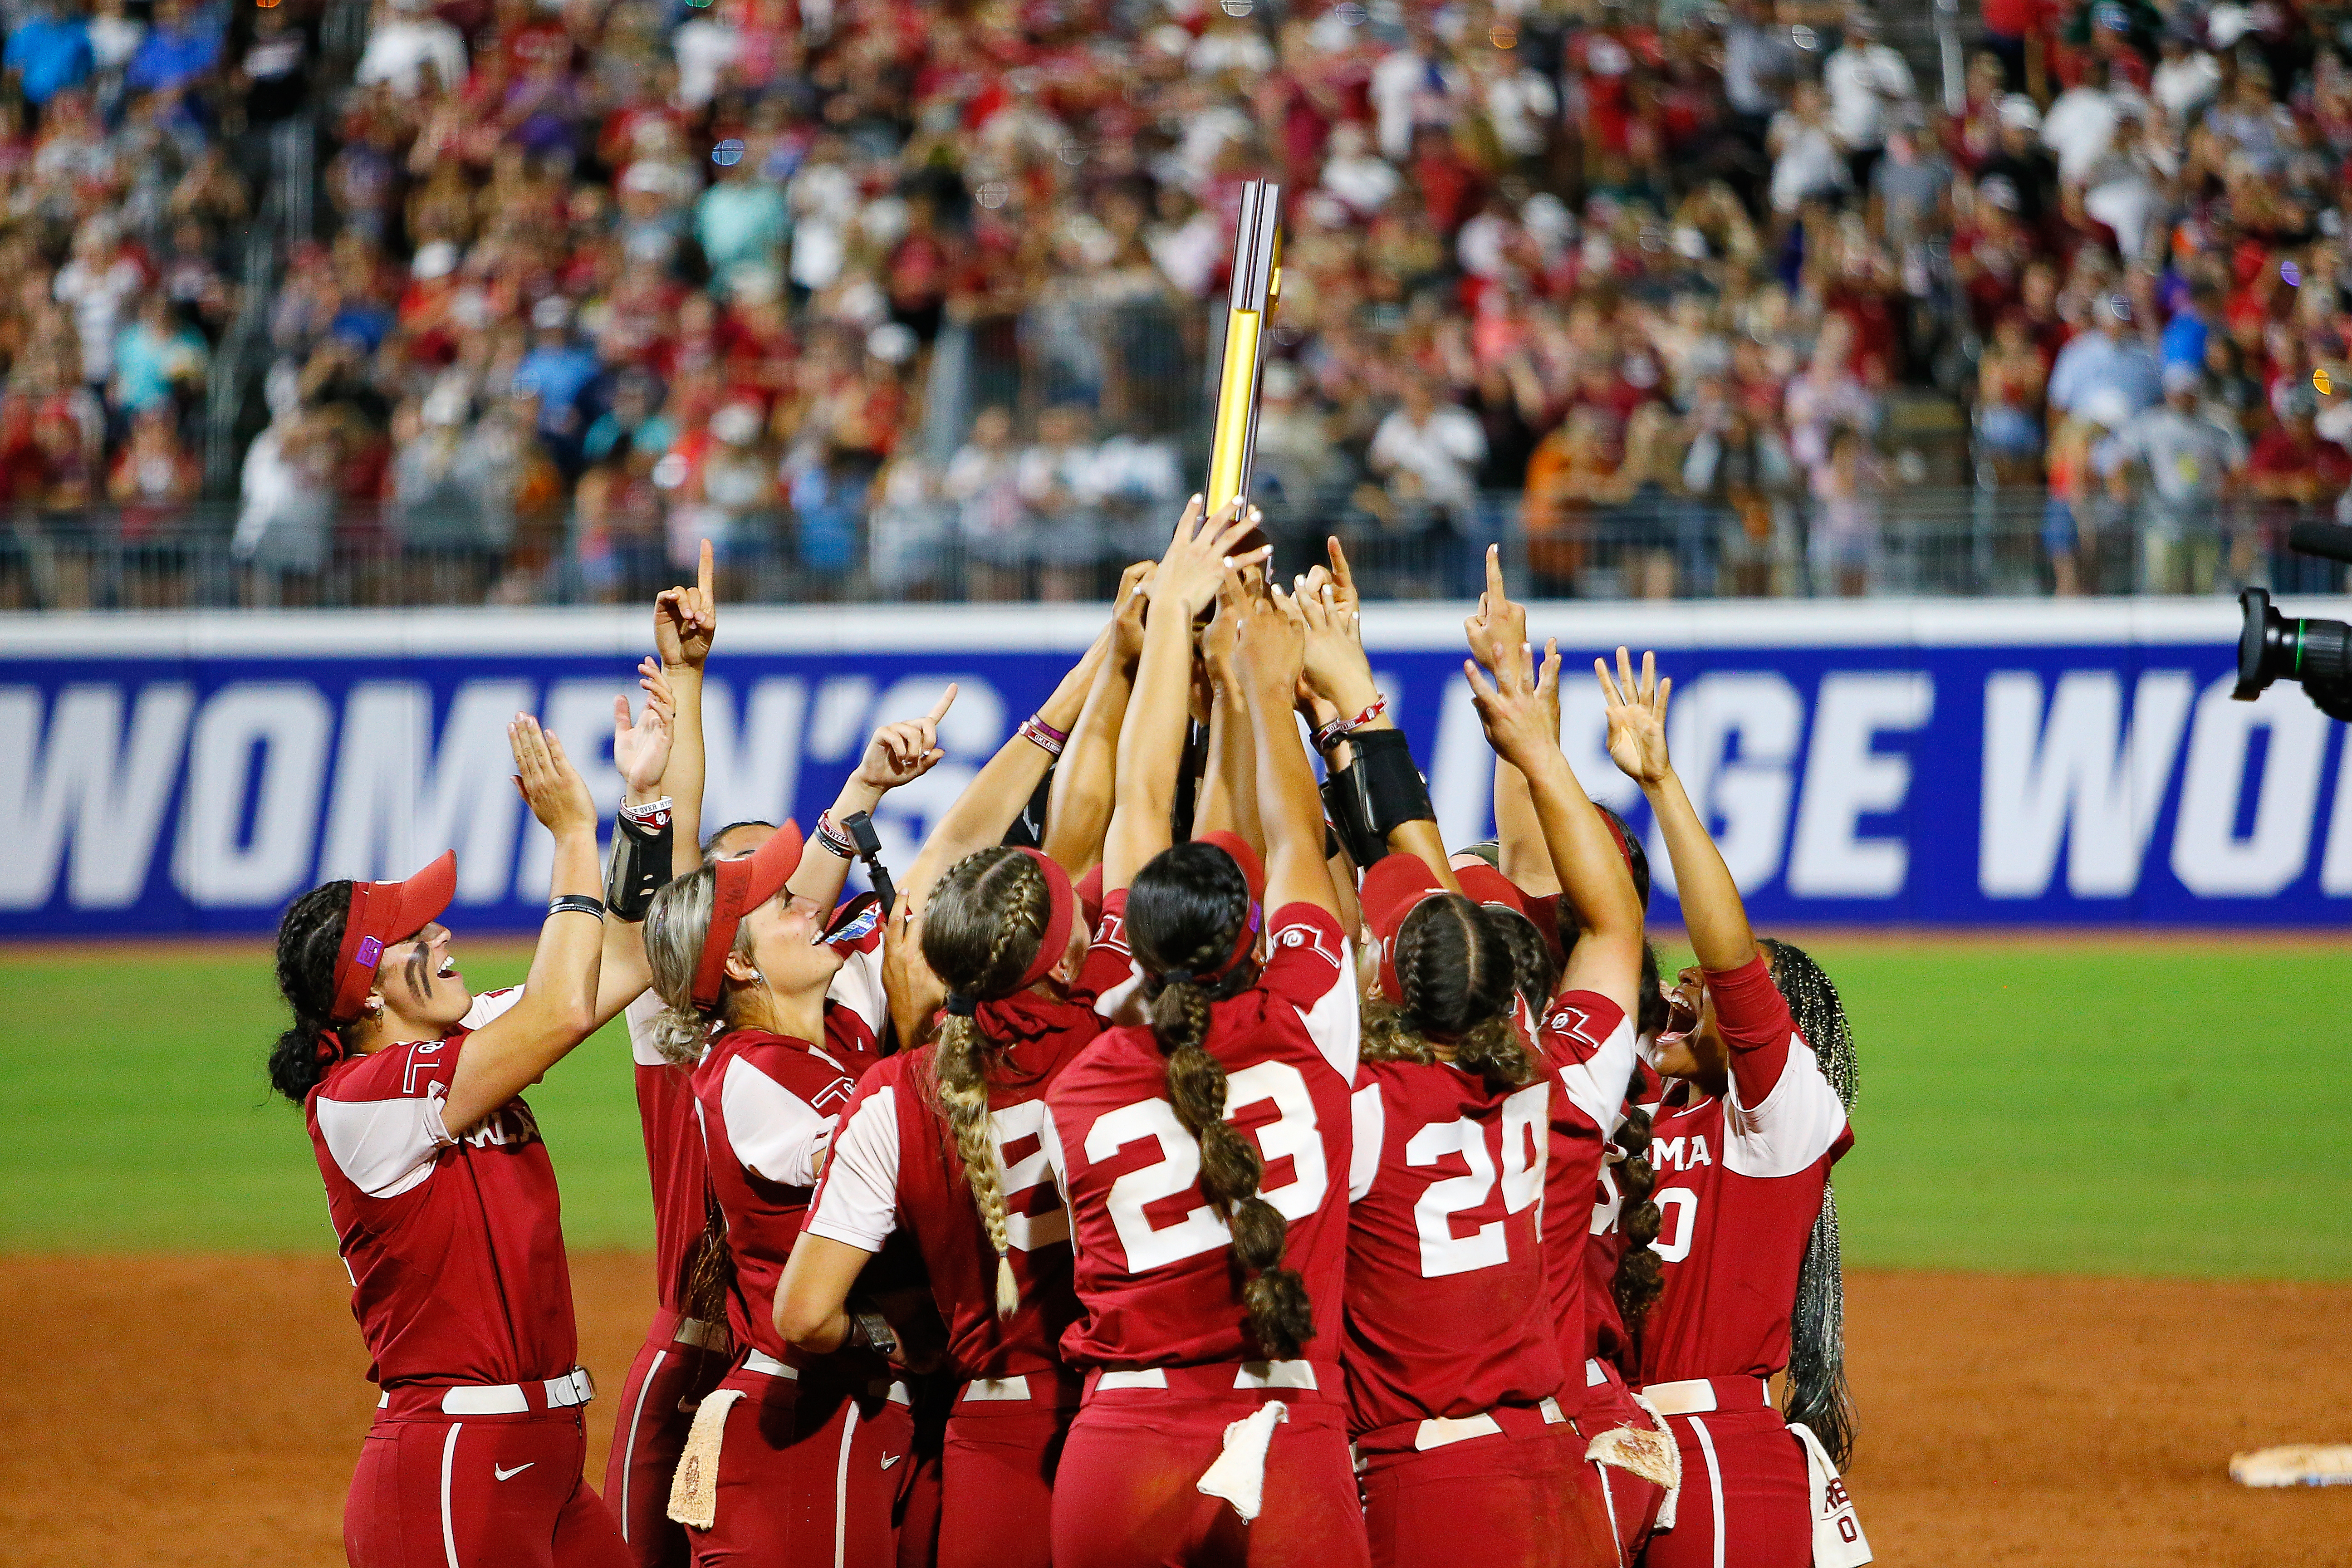 The Oklahoma Sooners lift up the NCAA trophy as they celebrate their championship win over the Texas Longhorns during the NCAA Women’s College World Series finals at the USA Softball Hall of Fame Complex on June 9, 2022 in Oklahoma City, Oklahoma. Oklahoma won the NCAA Championship with the 10-5 victory.